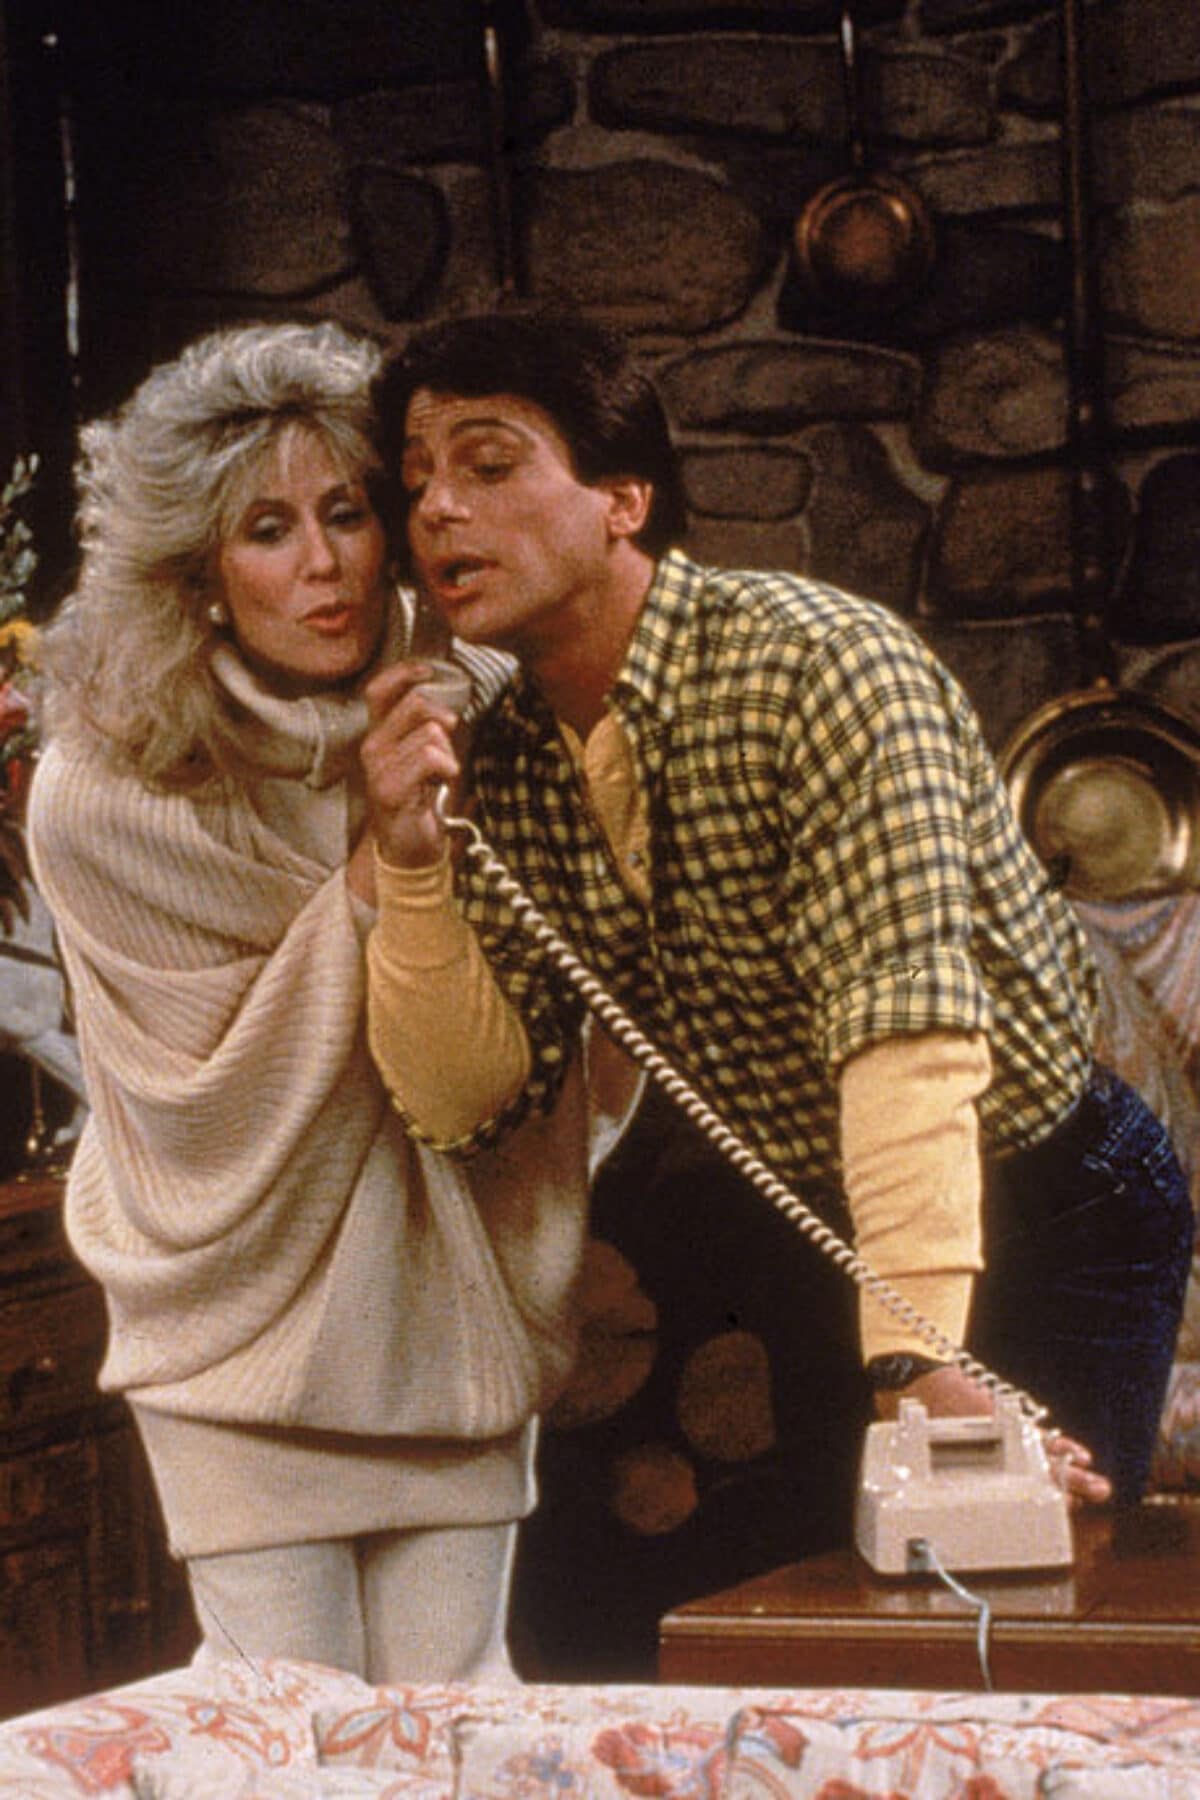 Actor Tony Danza eavesdrops as Judith Light speaks on the telephone, in a still from the TV series, 'Who's The Boss,' circa 1986. (Photo by ABC Television/Fotos International/Getty Images)